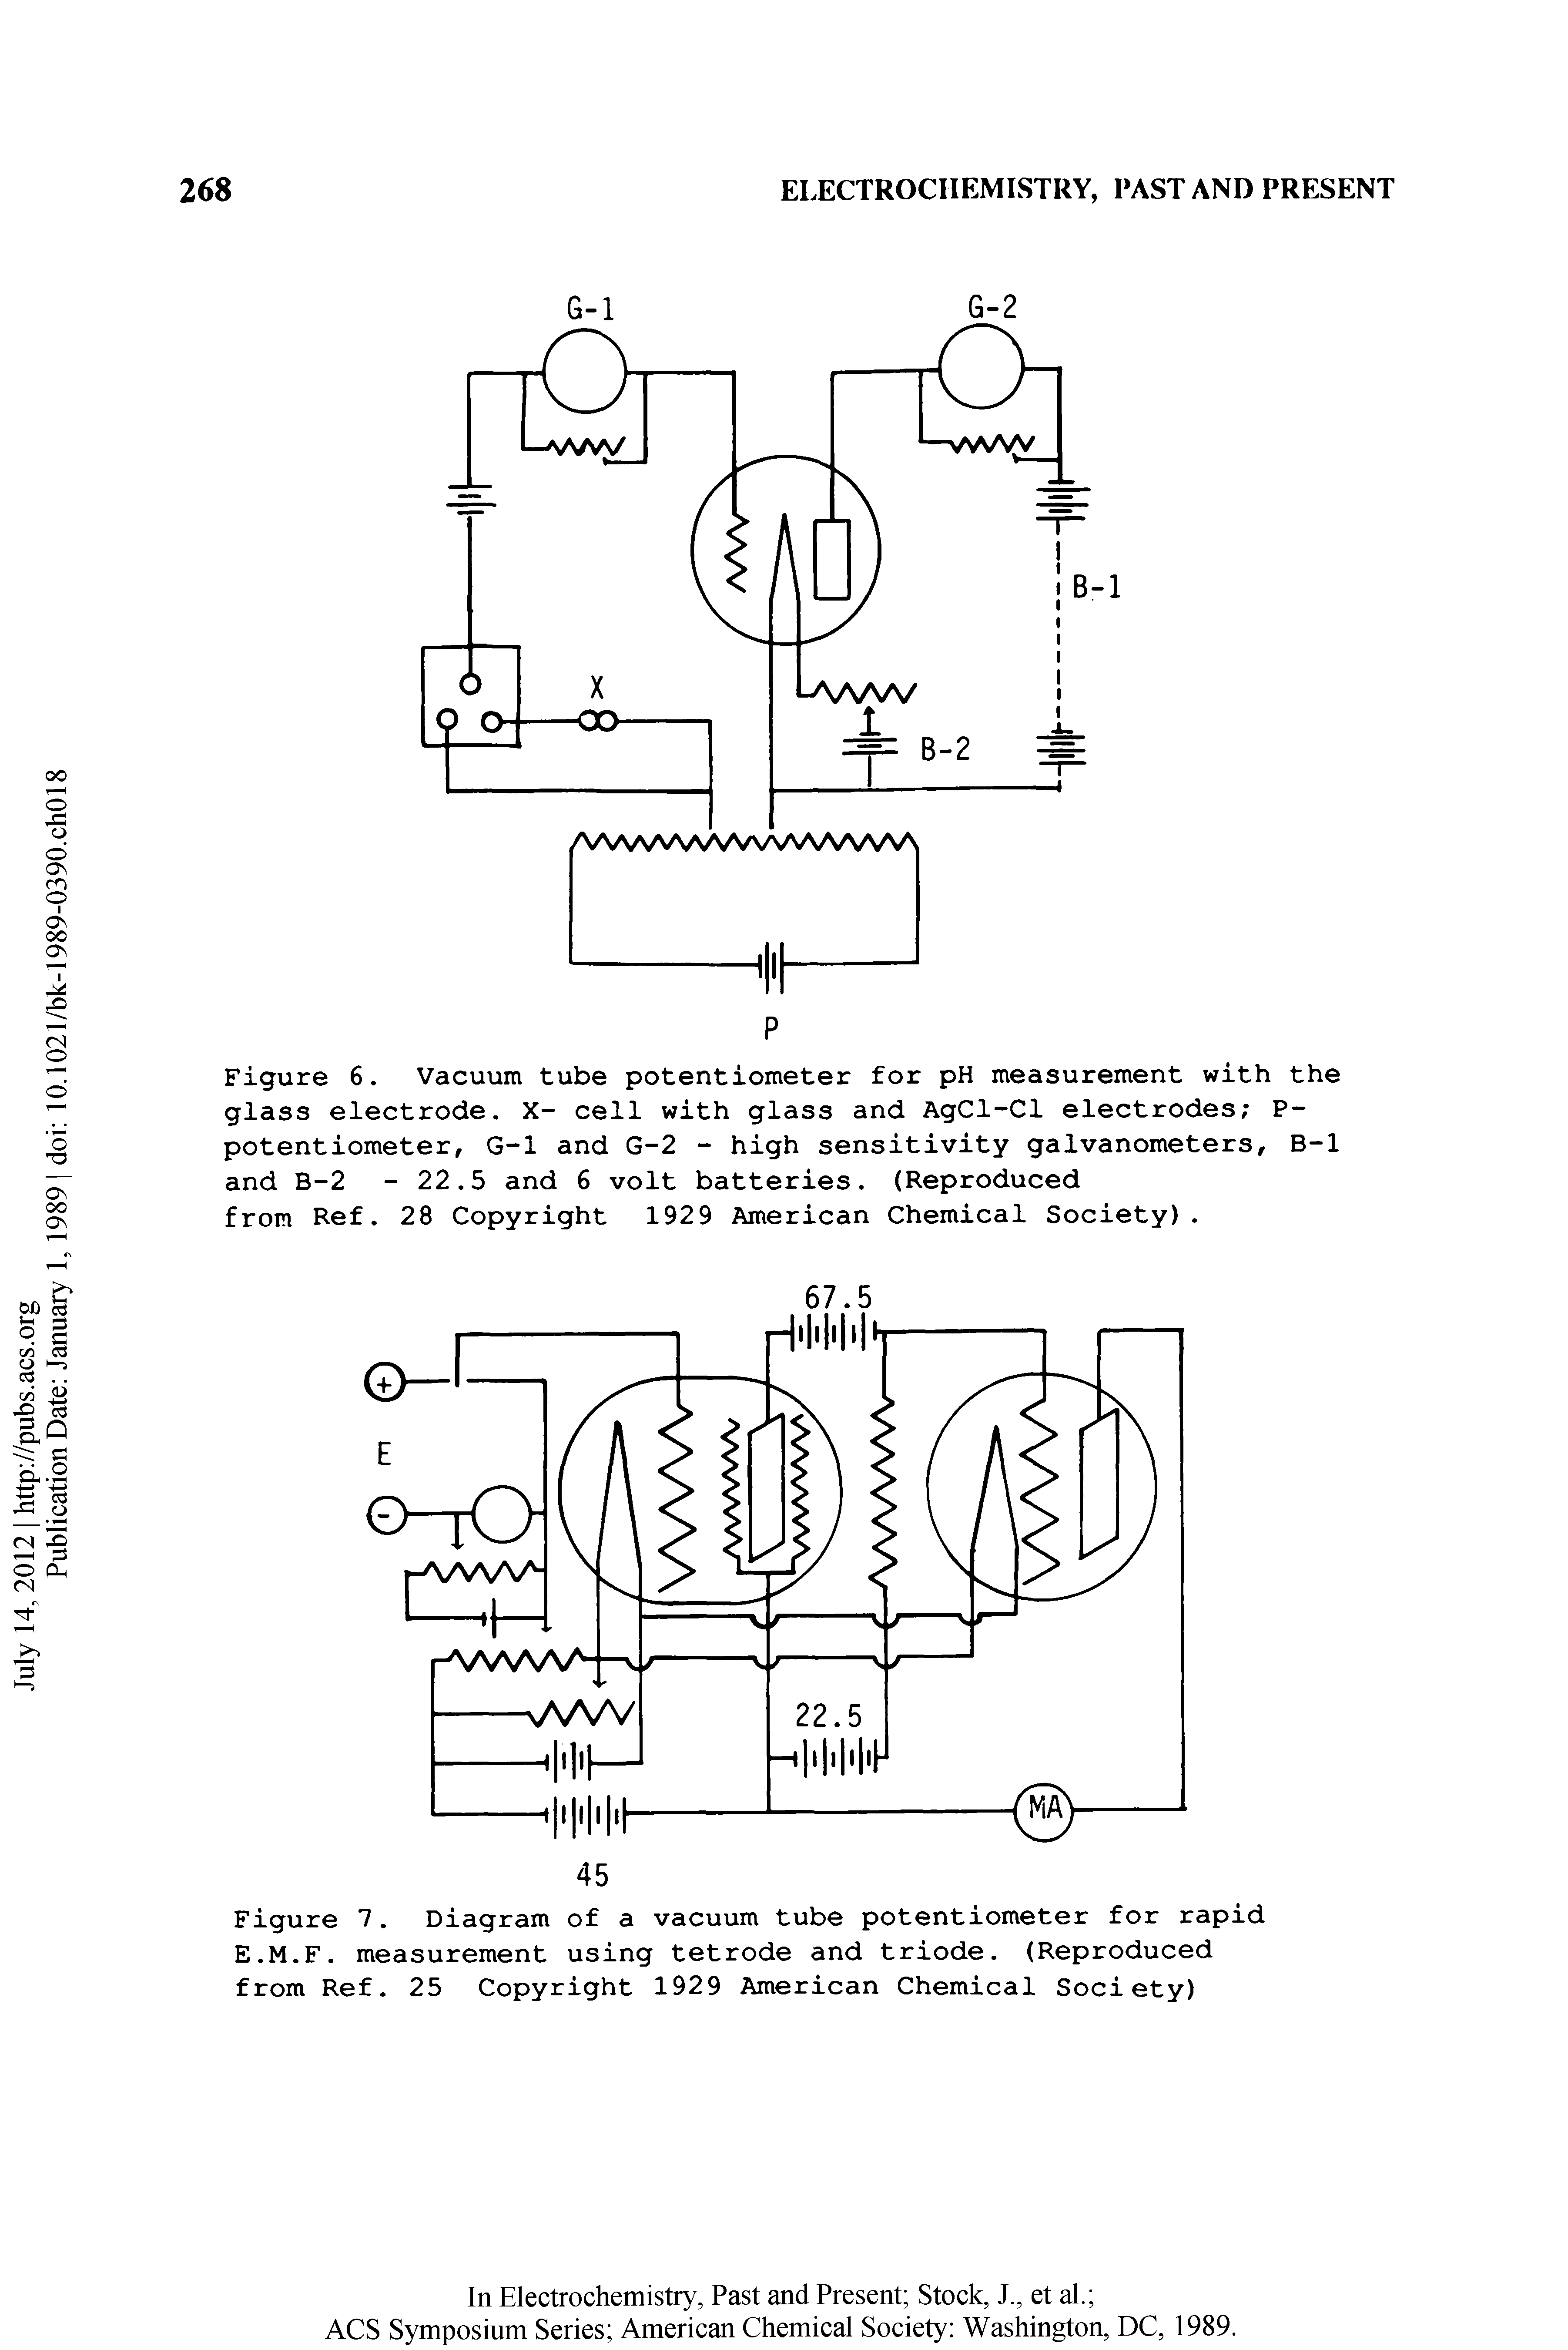 Figure 7. Diagram of a vacuum tube potentiometer for rapid E.M.F. measurement using tetrode and triode. (Reproduced from Ref. 25 Copyright 1929 American Chemical Society)...